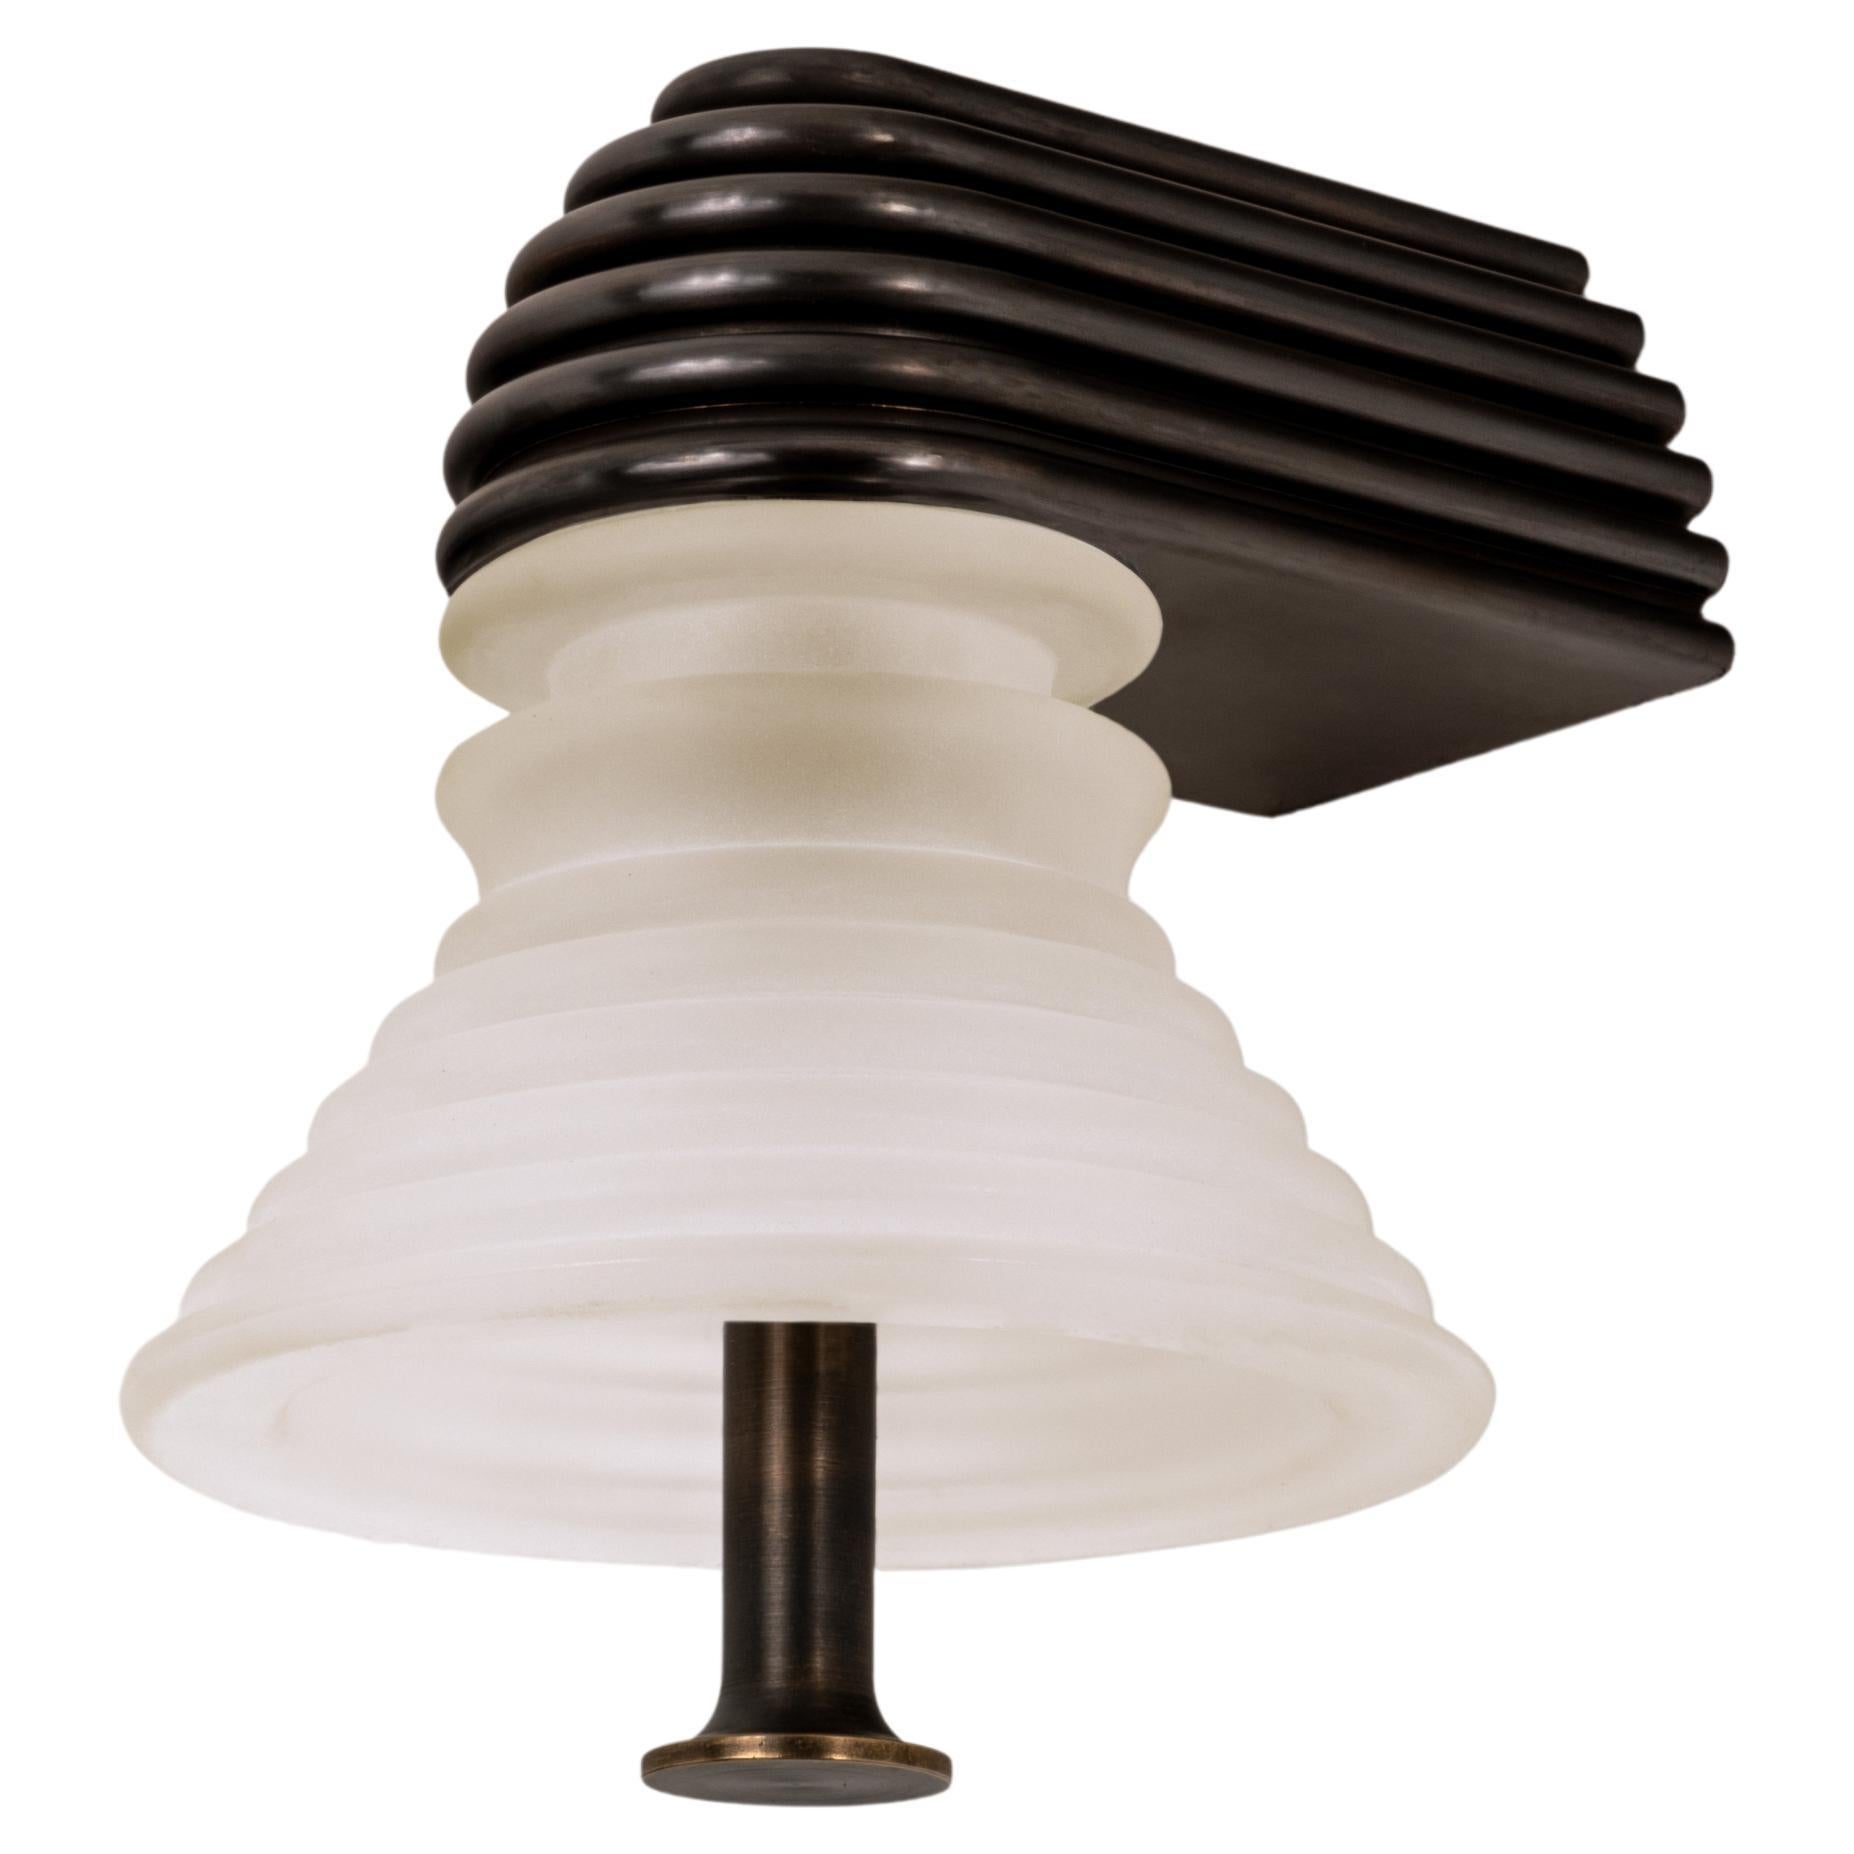 The Insulator 'A' Sconce in dark brass and frosted glass by NOVOCASTRIAN deco For Sale